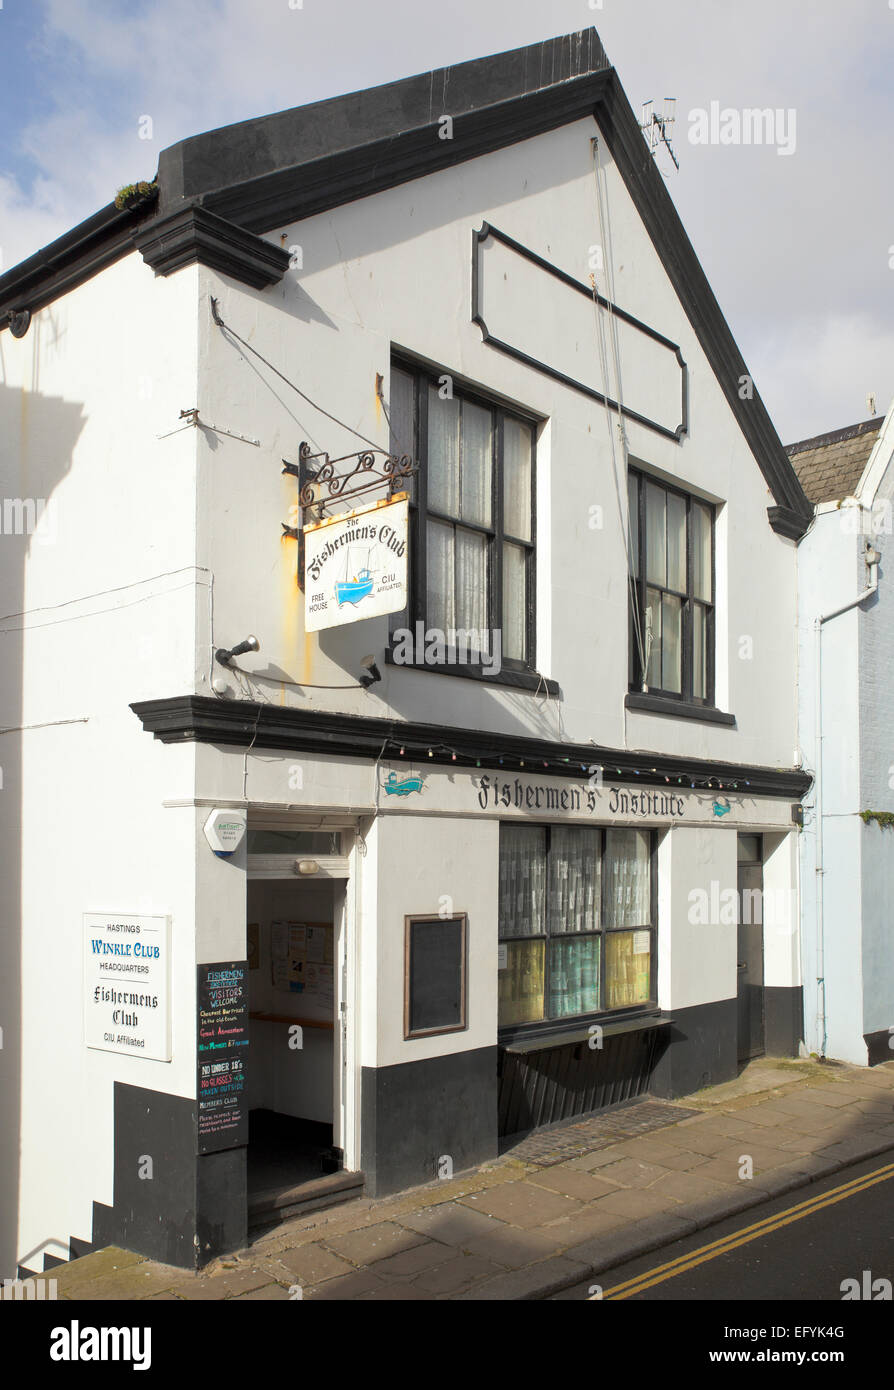 The Fishermens Institute, Hastings old town. Stock Photo